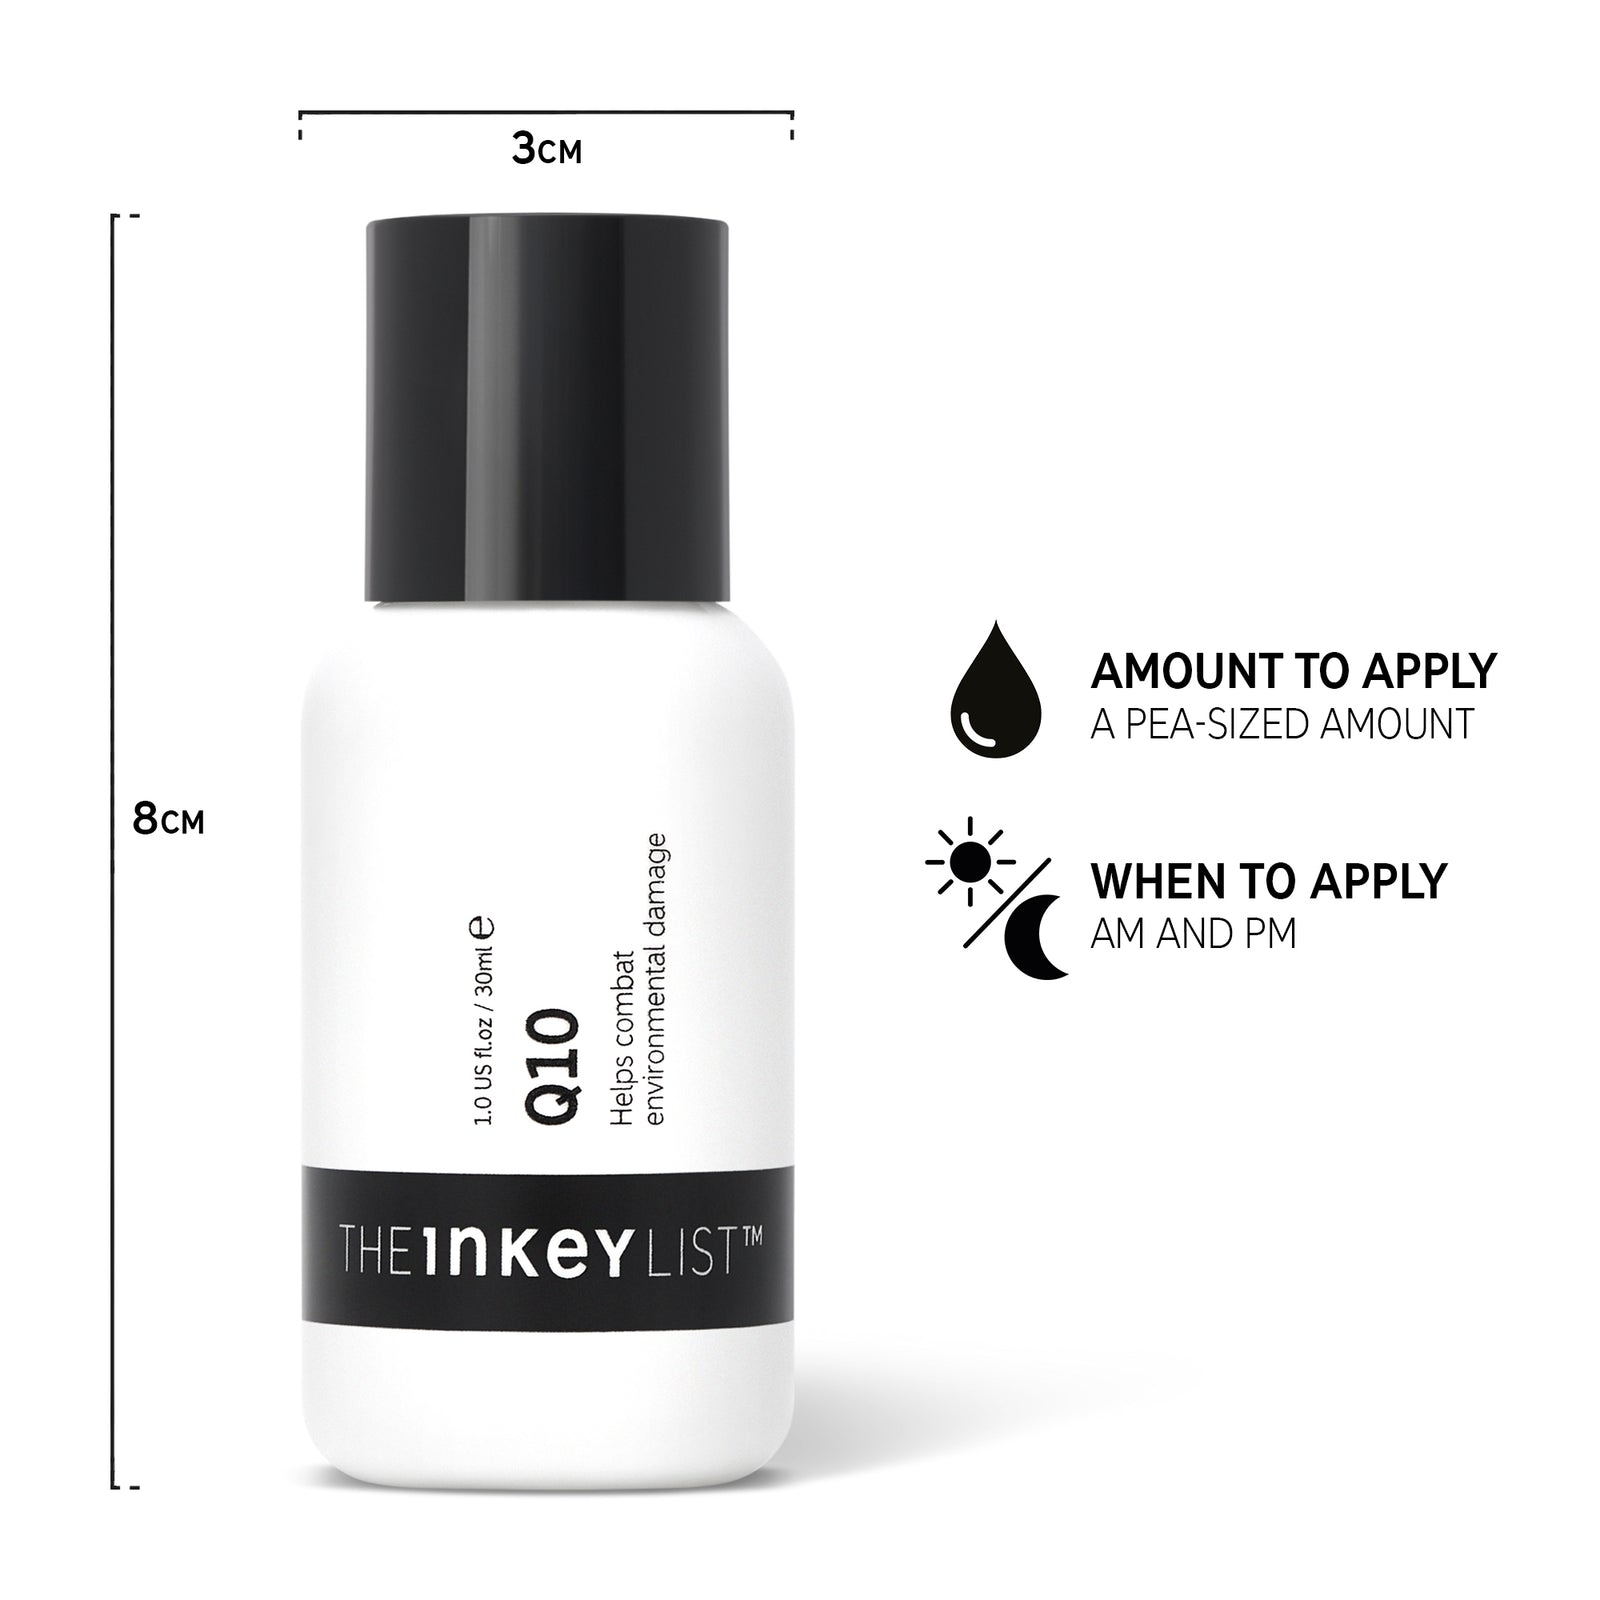 How and when to use Q10 Serum in your routine. Also included in infographic are the dimensions of the 30ml bottle. 8X3CM Q10 Serum pack shot annotated with how and when to use it and dimensions of bottle. Text reads 'Amount to apply (pea-sized amount)' and 'When to apply (AM and PM)'